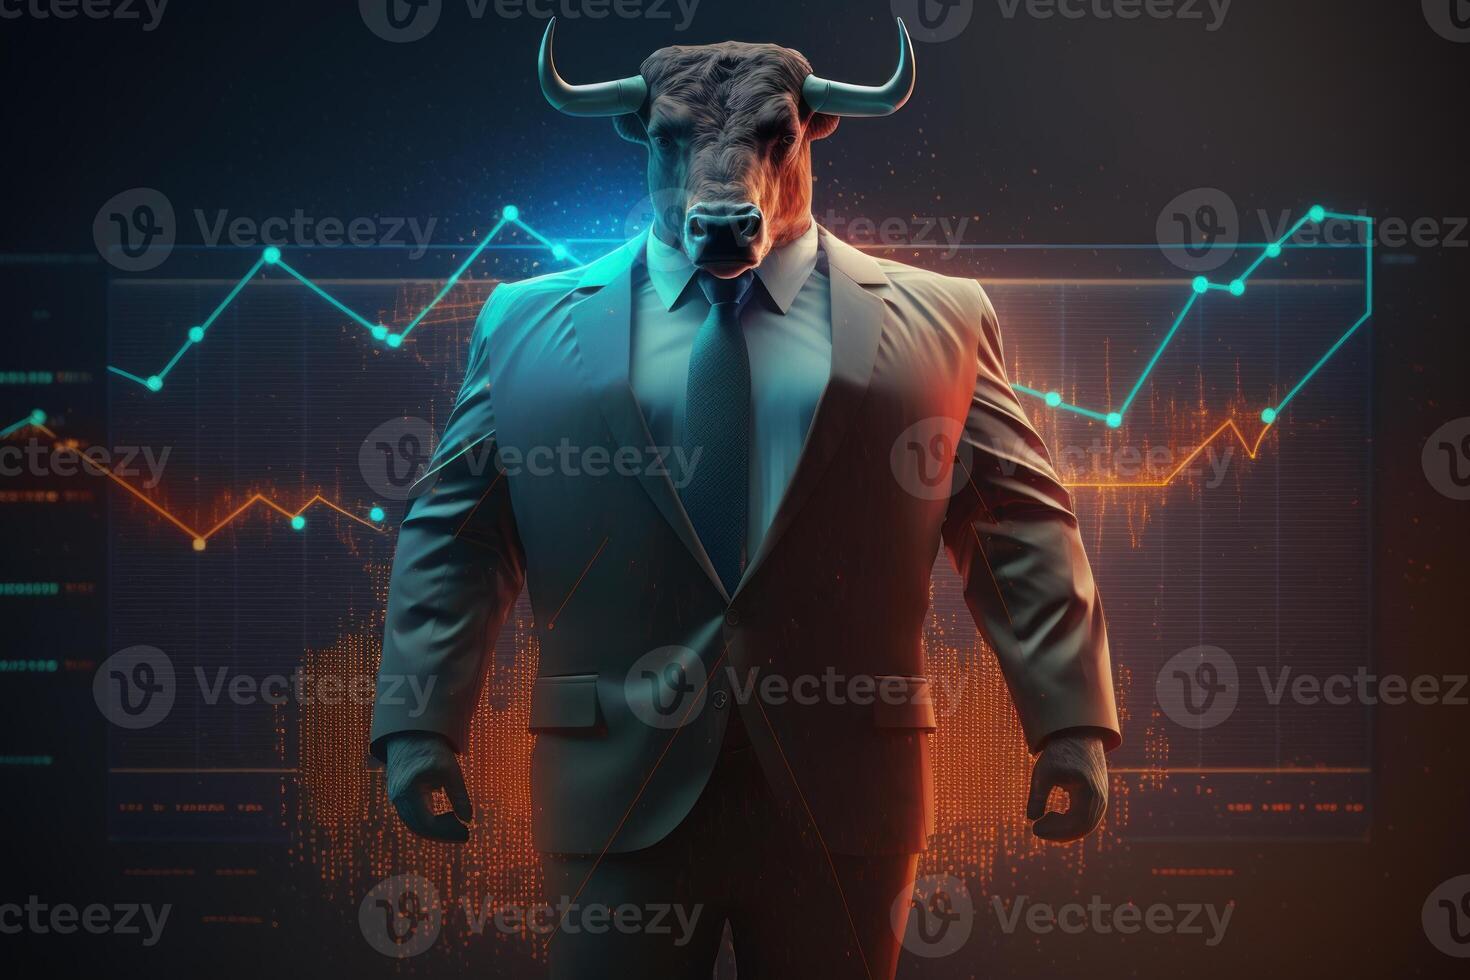 Bull wearing suit working with graph on screen, Bullish in Stock market and Crypto currency. Created photo